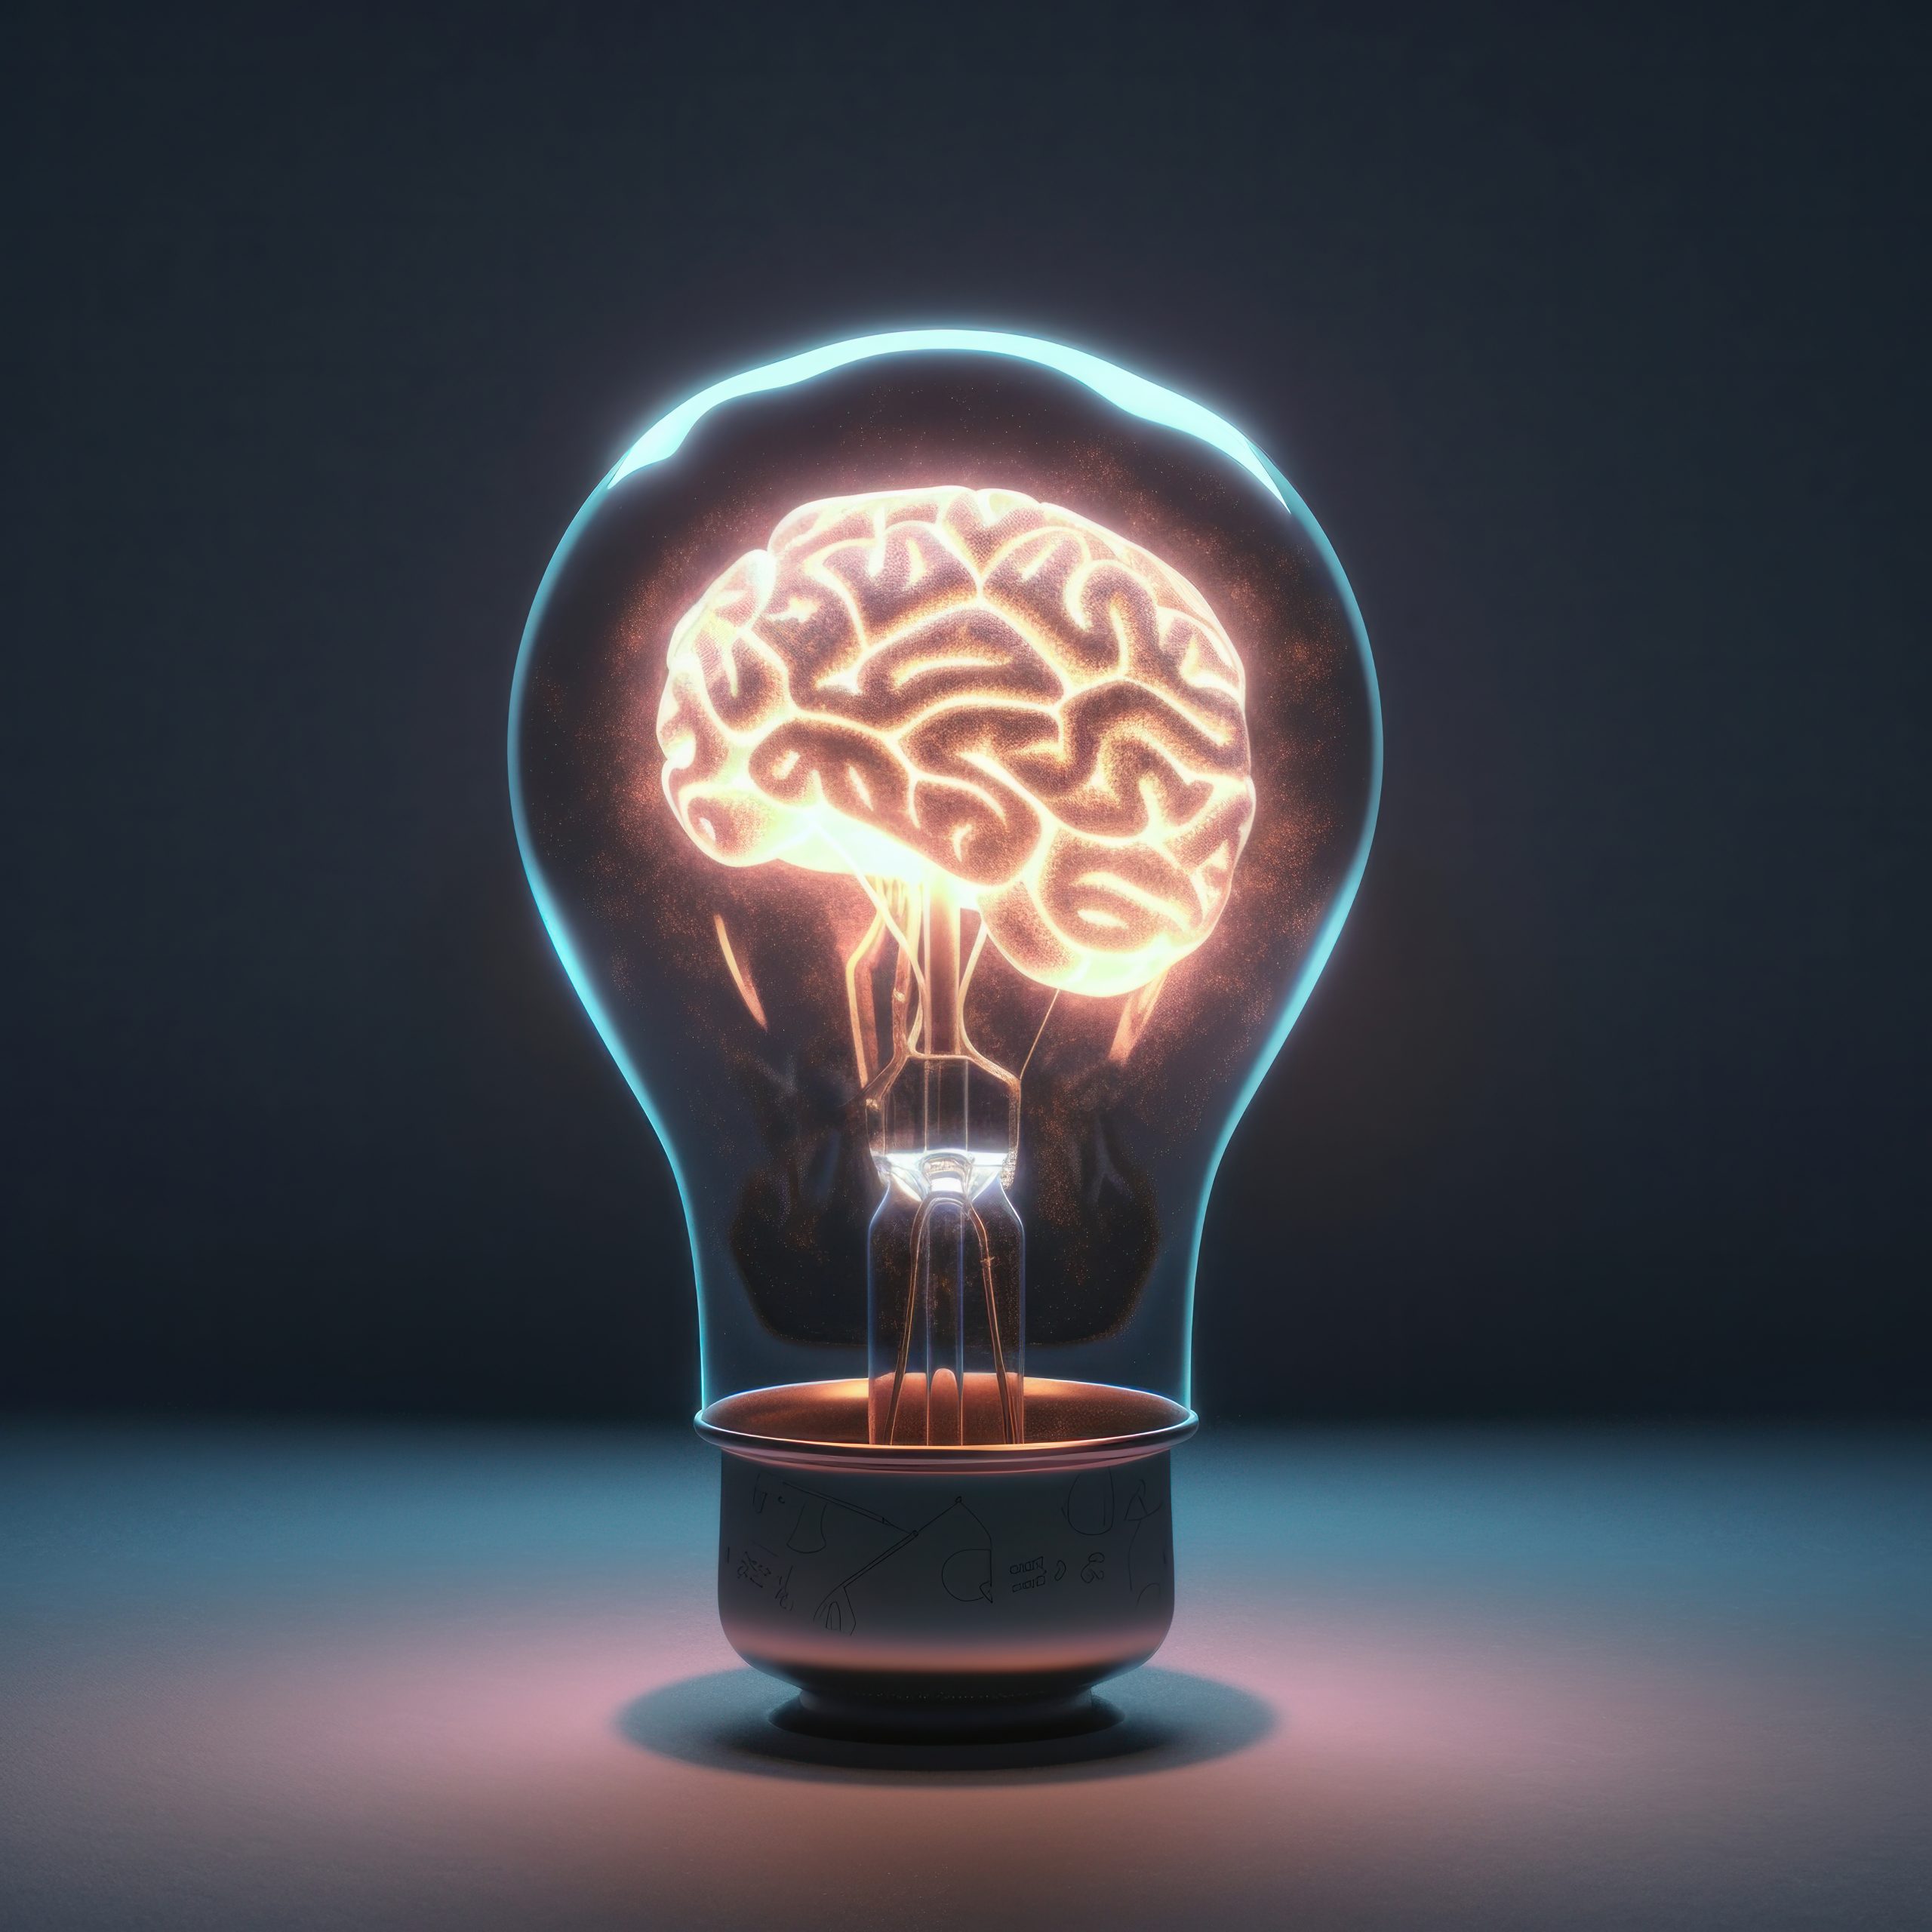 A light bulb with a glowing brain inside is a powerful visual representation